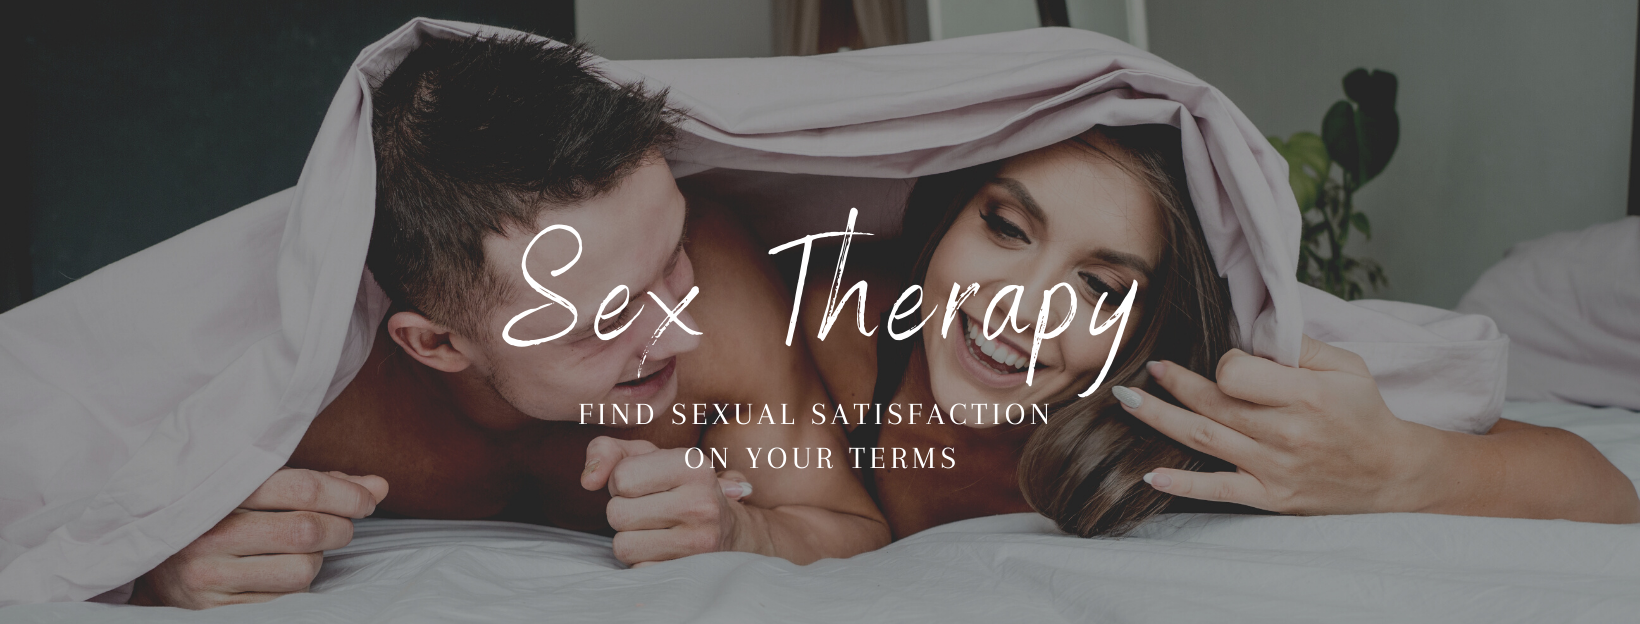 sex therapy married couples Adult Pictures